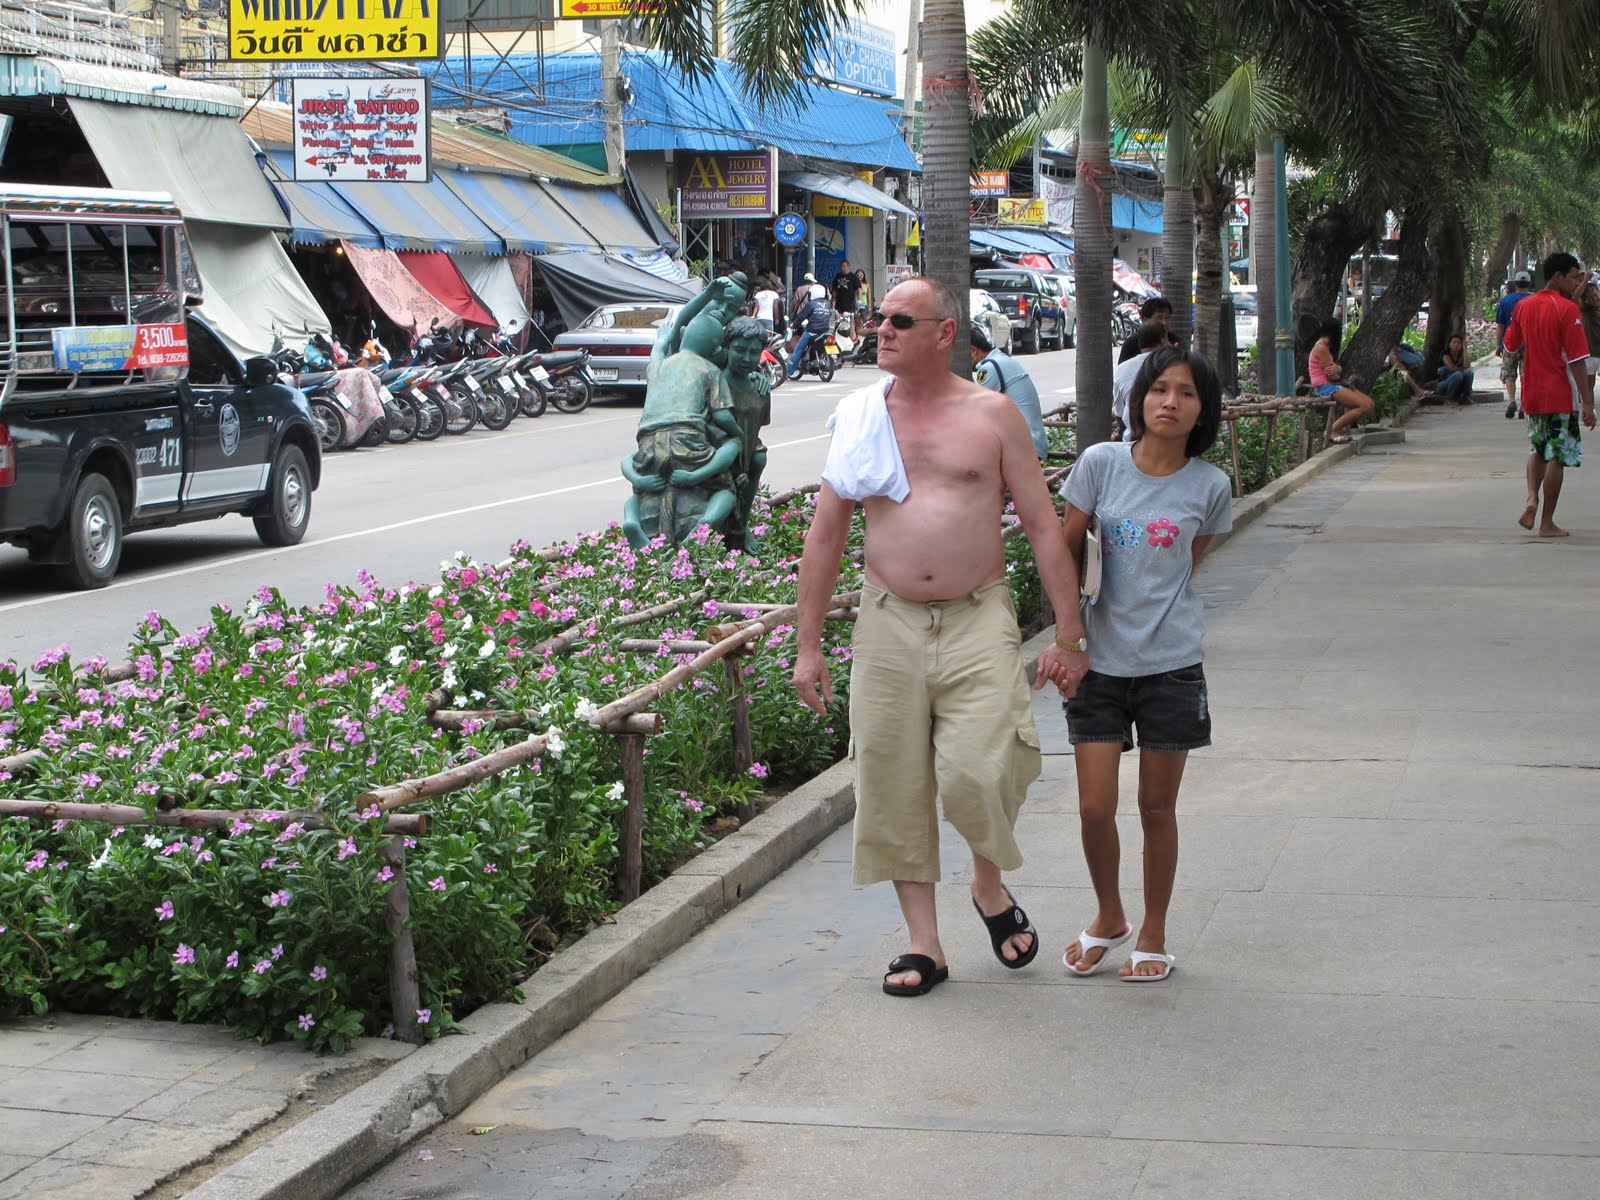 Amazing Thailand. The dos and don'ts. The funny stuff.